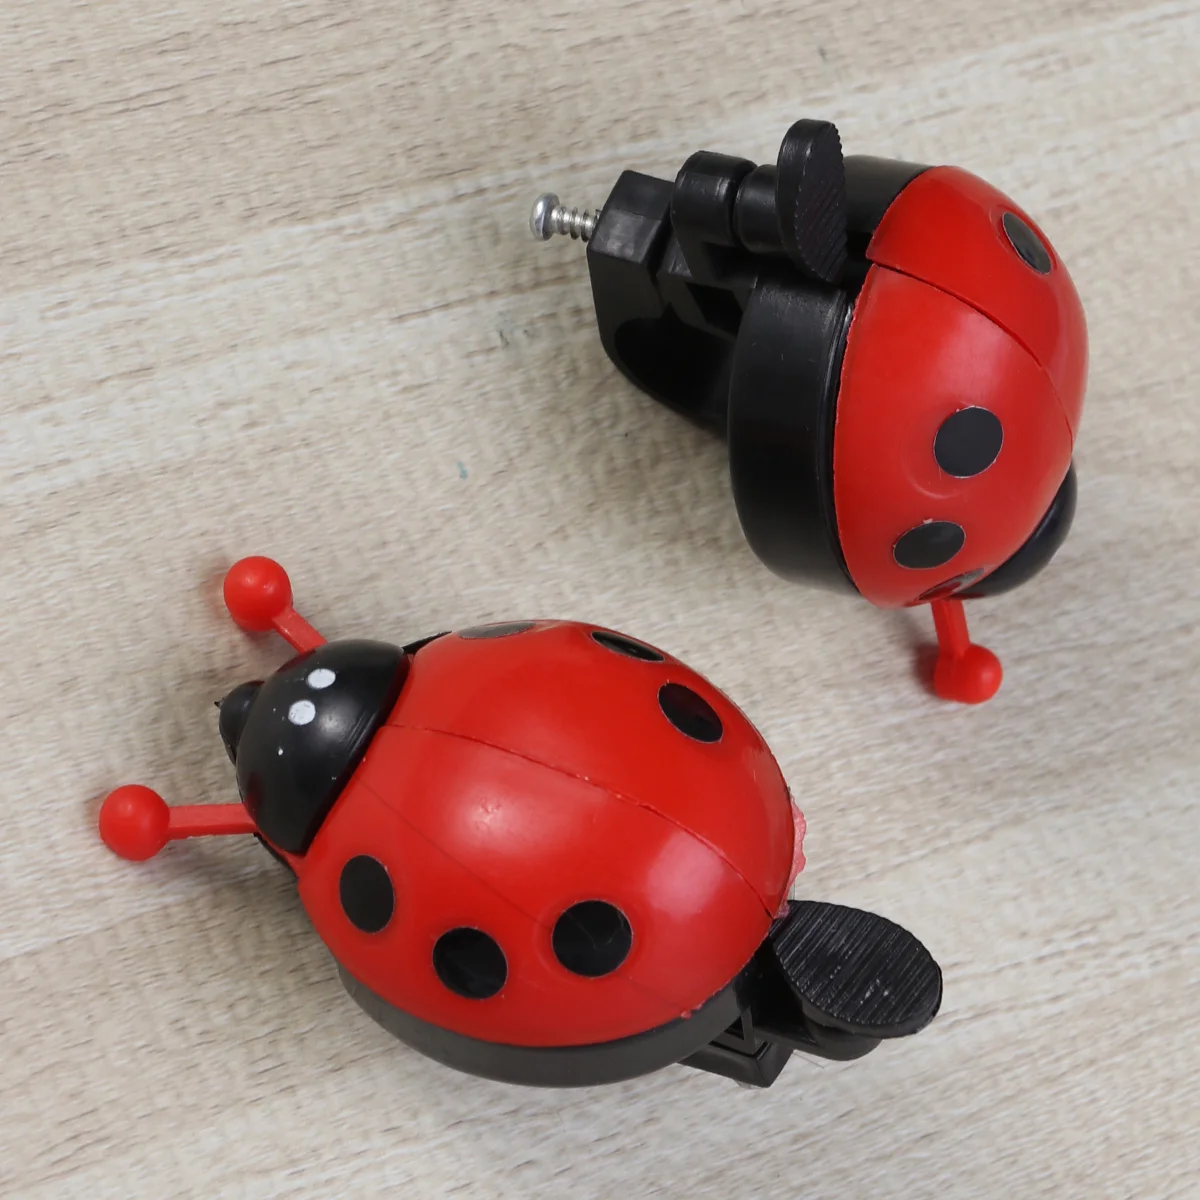 

Bike Bell Horn Kidsmountain Accessorieshandlebar Ring Cycling Road Bugle Ladybug Rings Parts Children Decorations Mtb Scooter